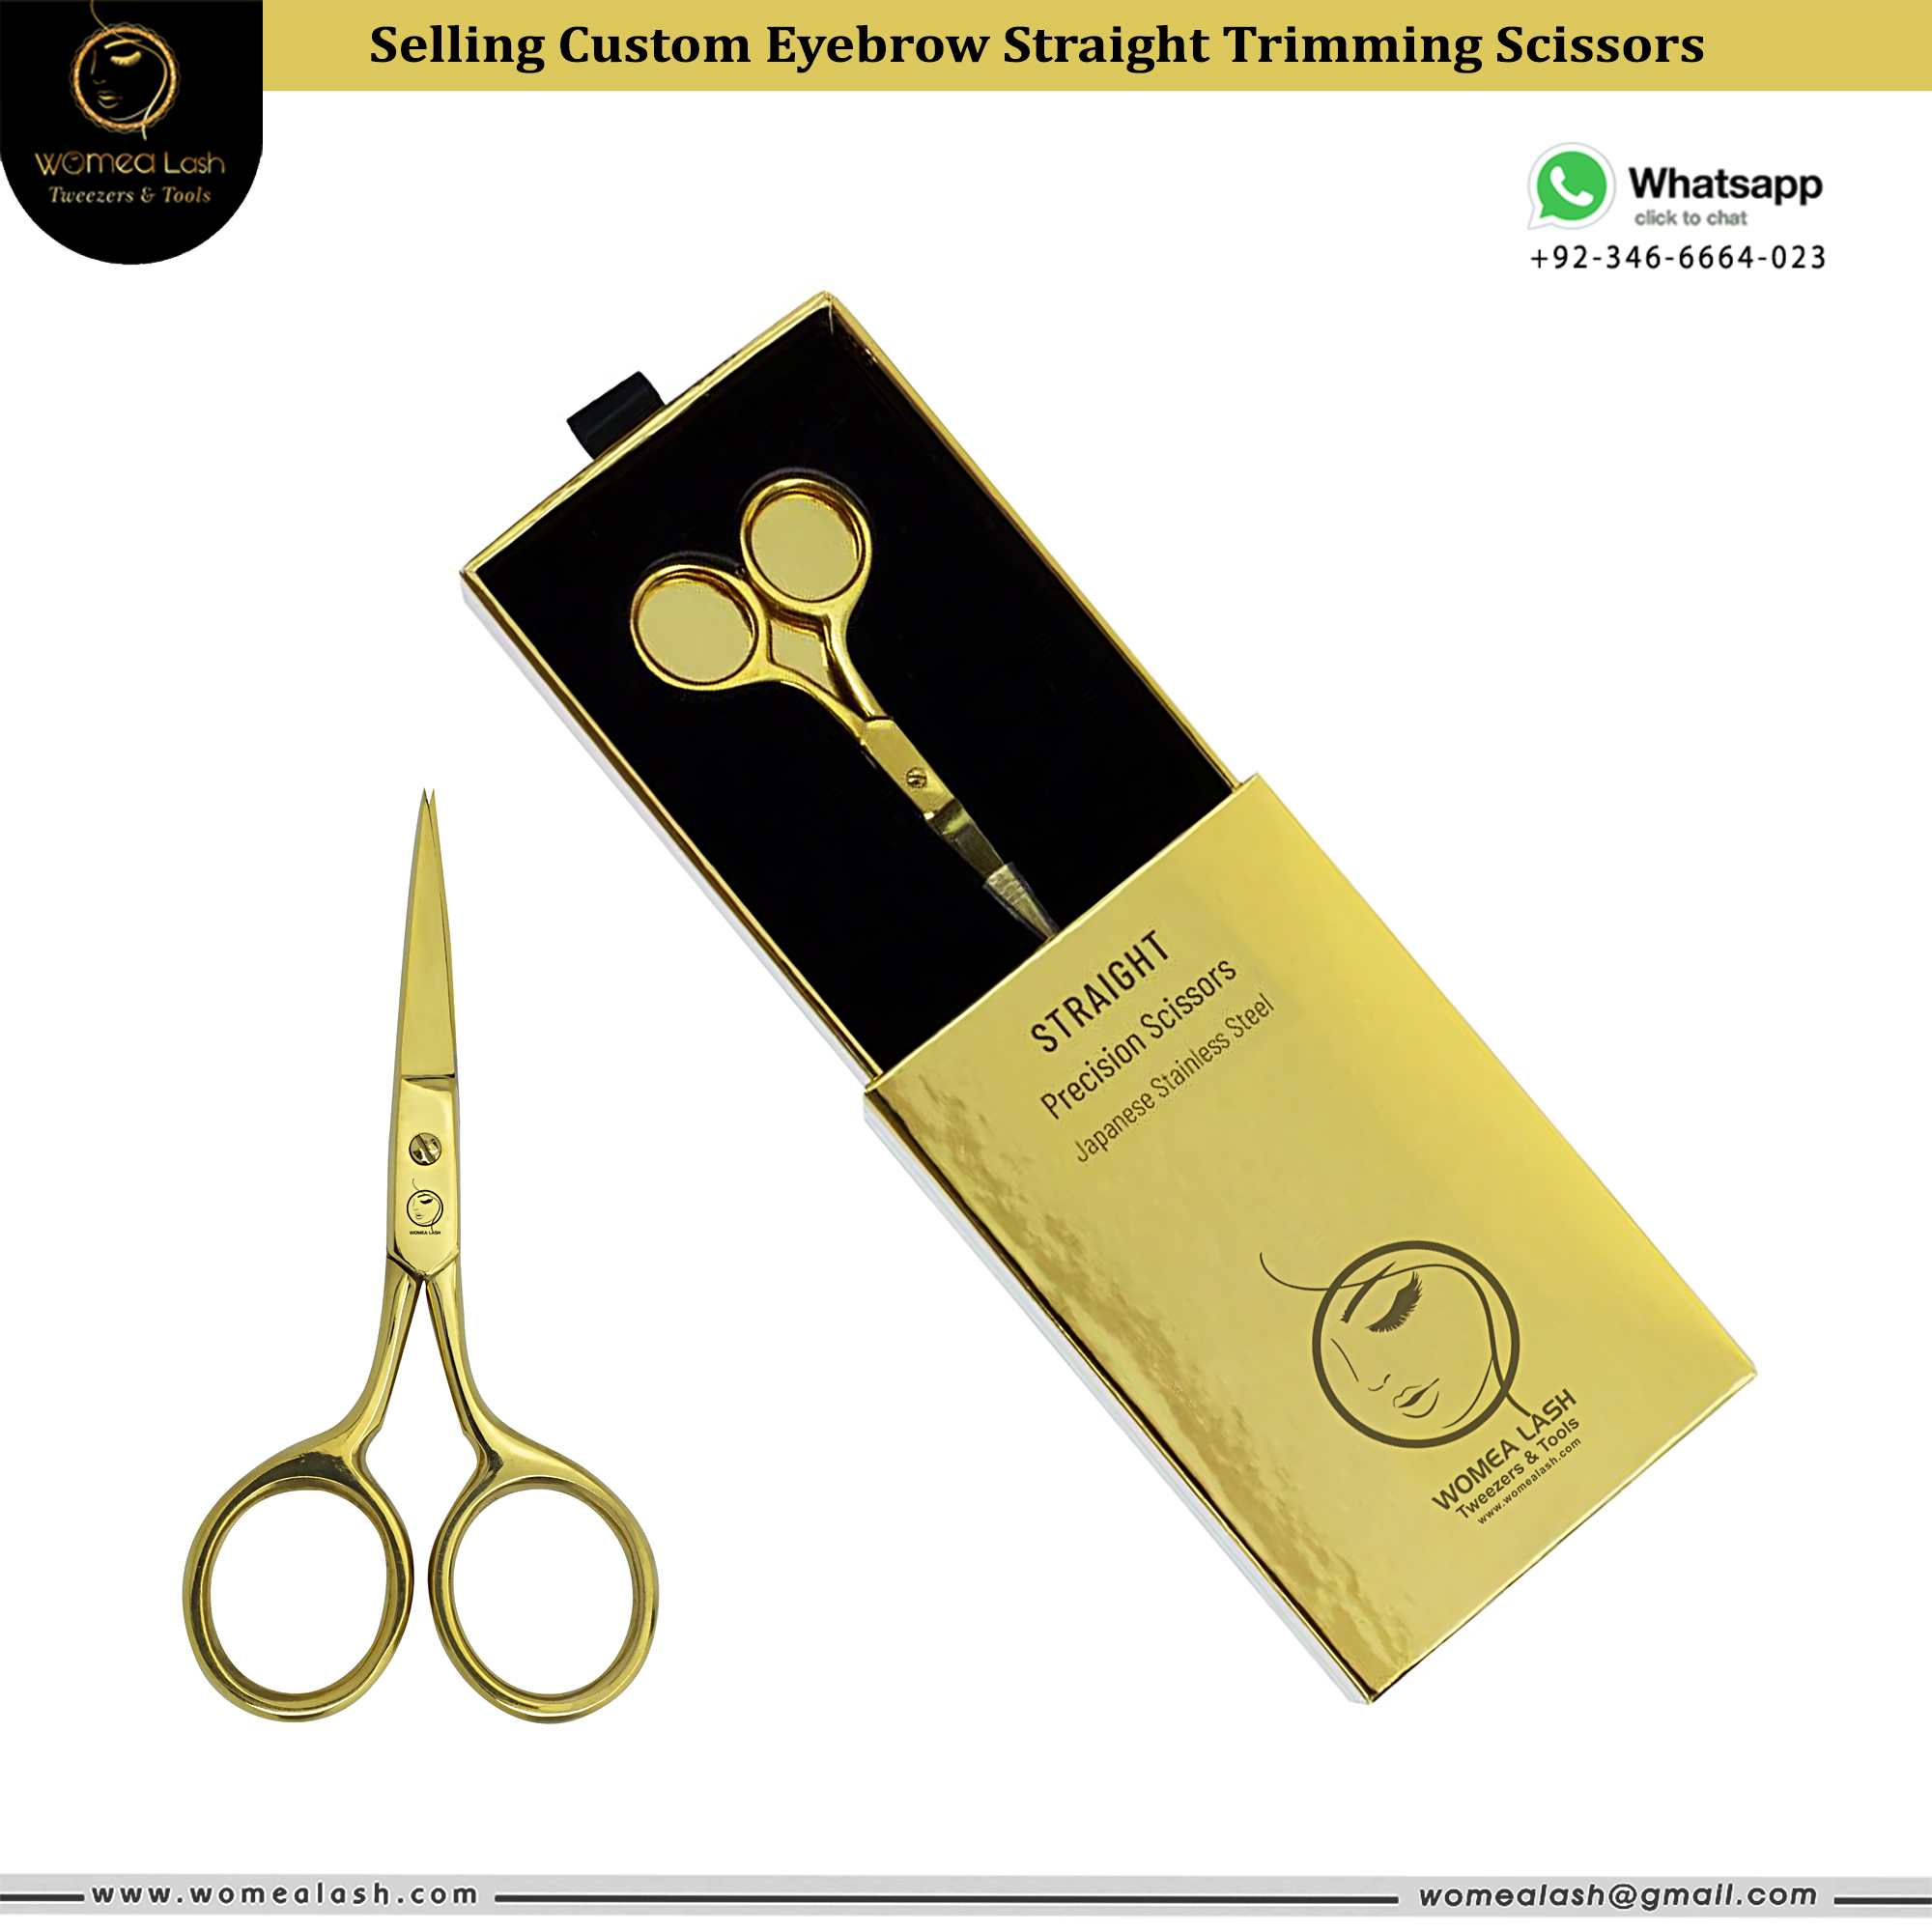 Selling Custom Eyebrow Straight Trimming Scissors With Art Card Packaging Packing Box